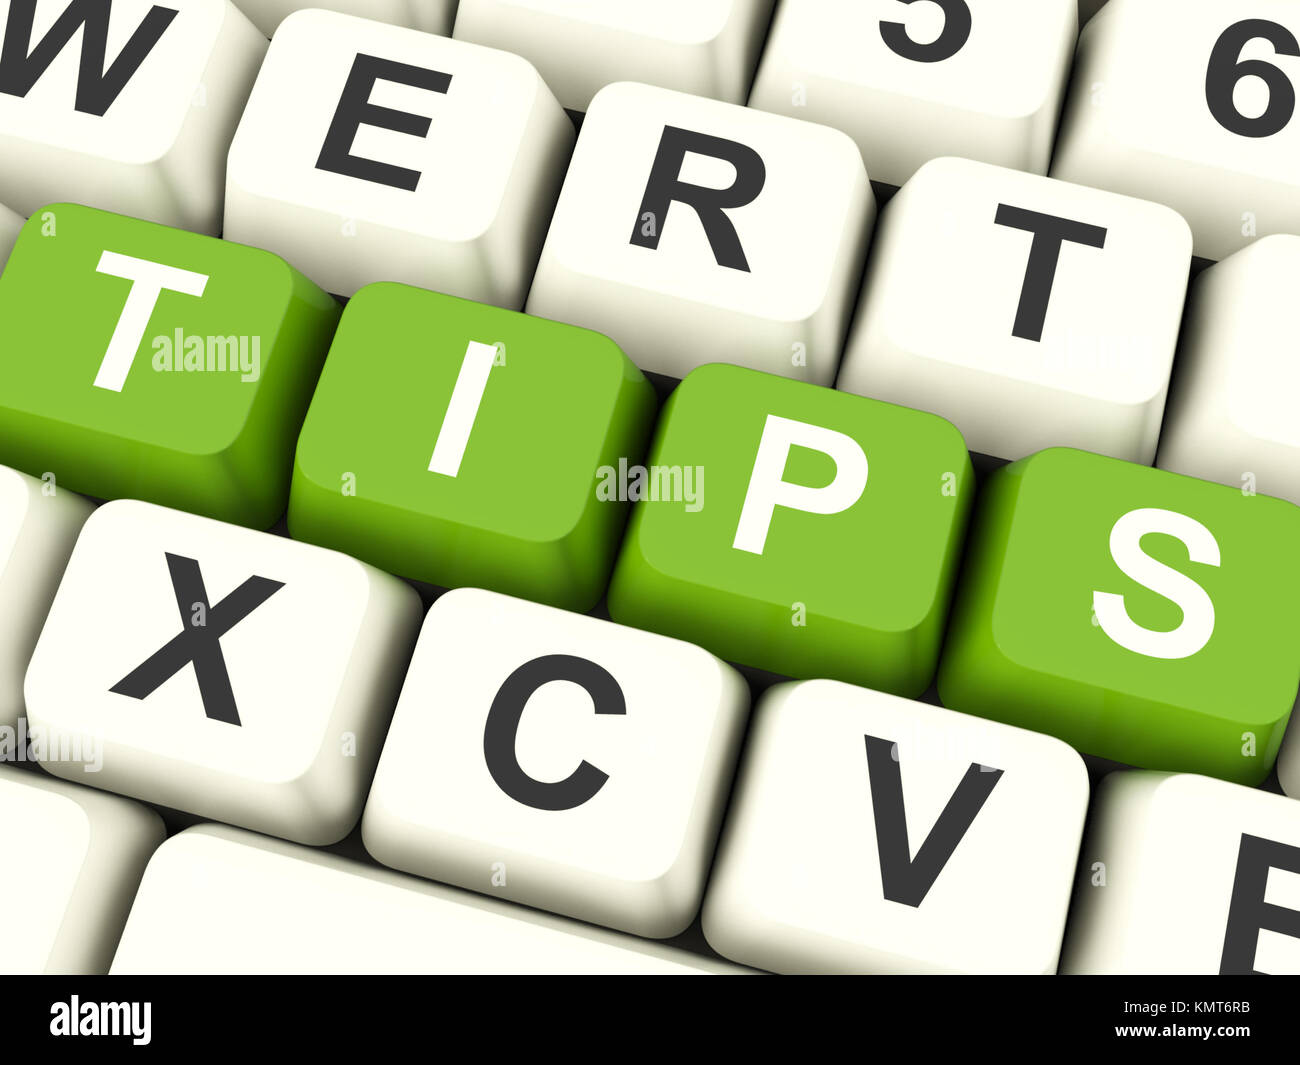 Tips Computer Keys Meaning Hints And Guidance Stock Photo